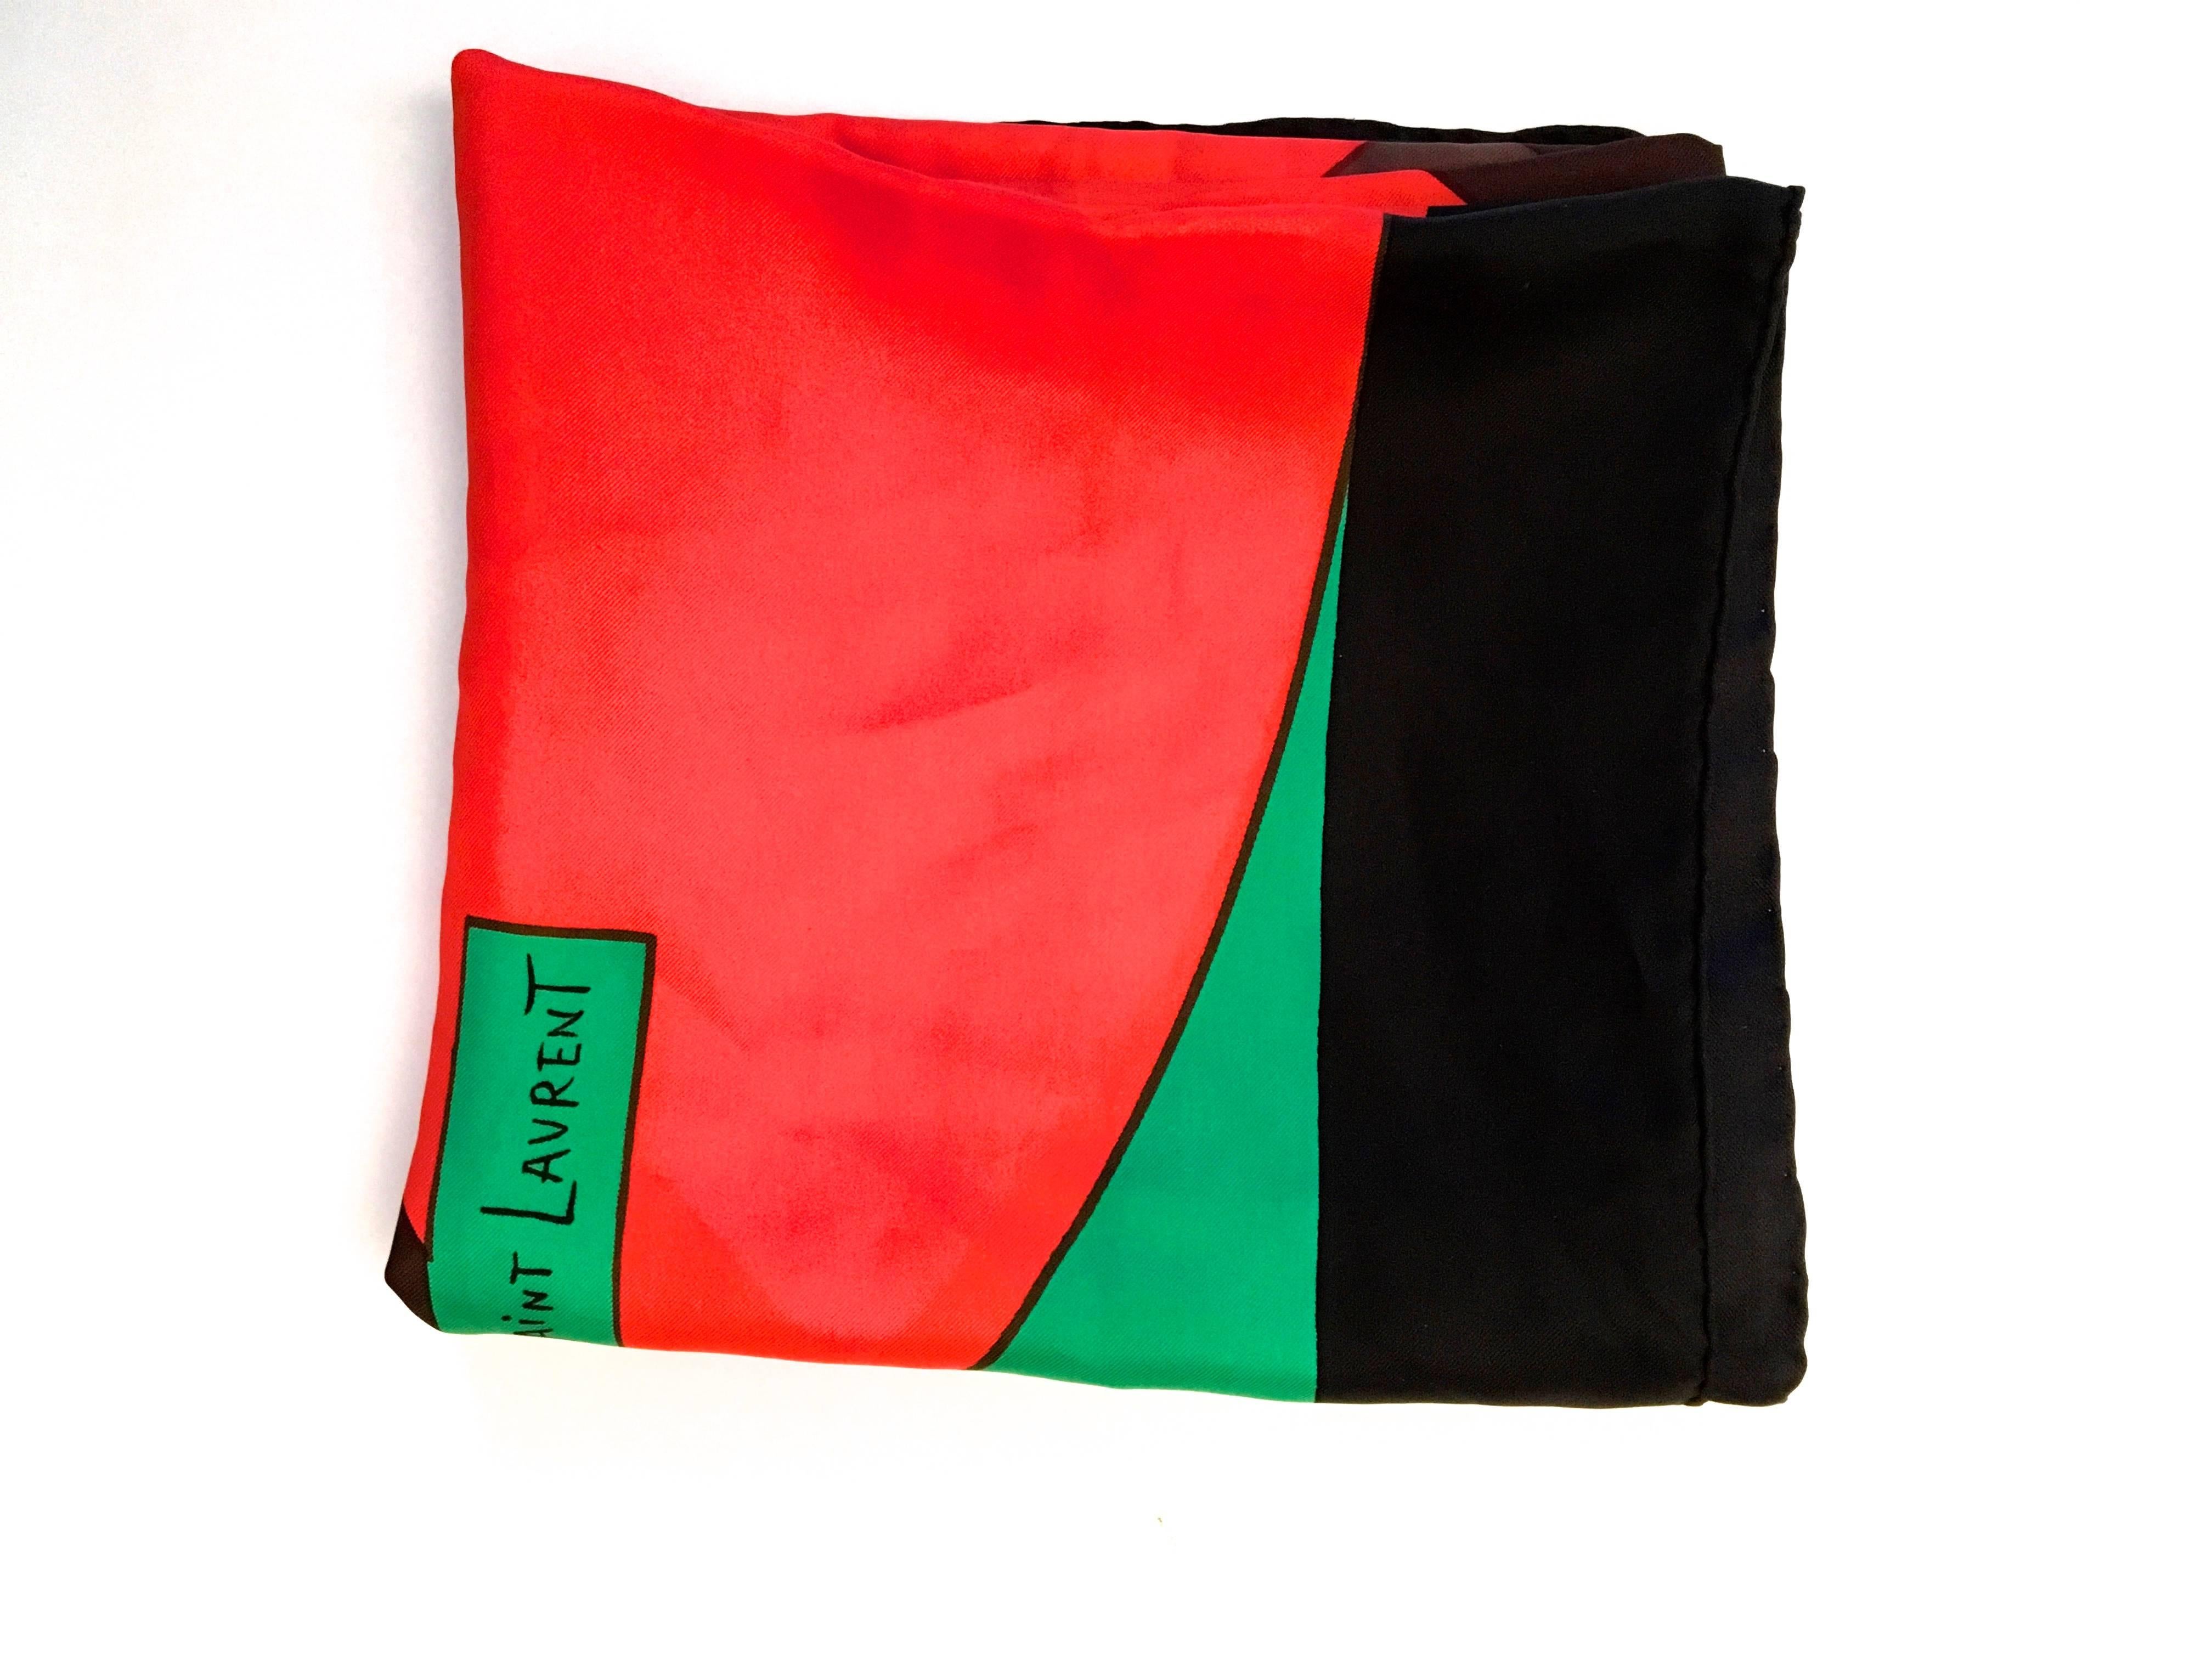 Presented here is a scarf from Yves Saint Laurent (YSL.) The 100% silk scarf is from the early 1980's. The mod geometric scarf is a design comprised of a red circle with a large X through the center against a bright green background. The X figure is